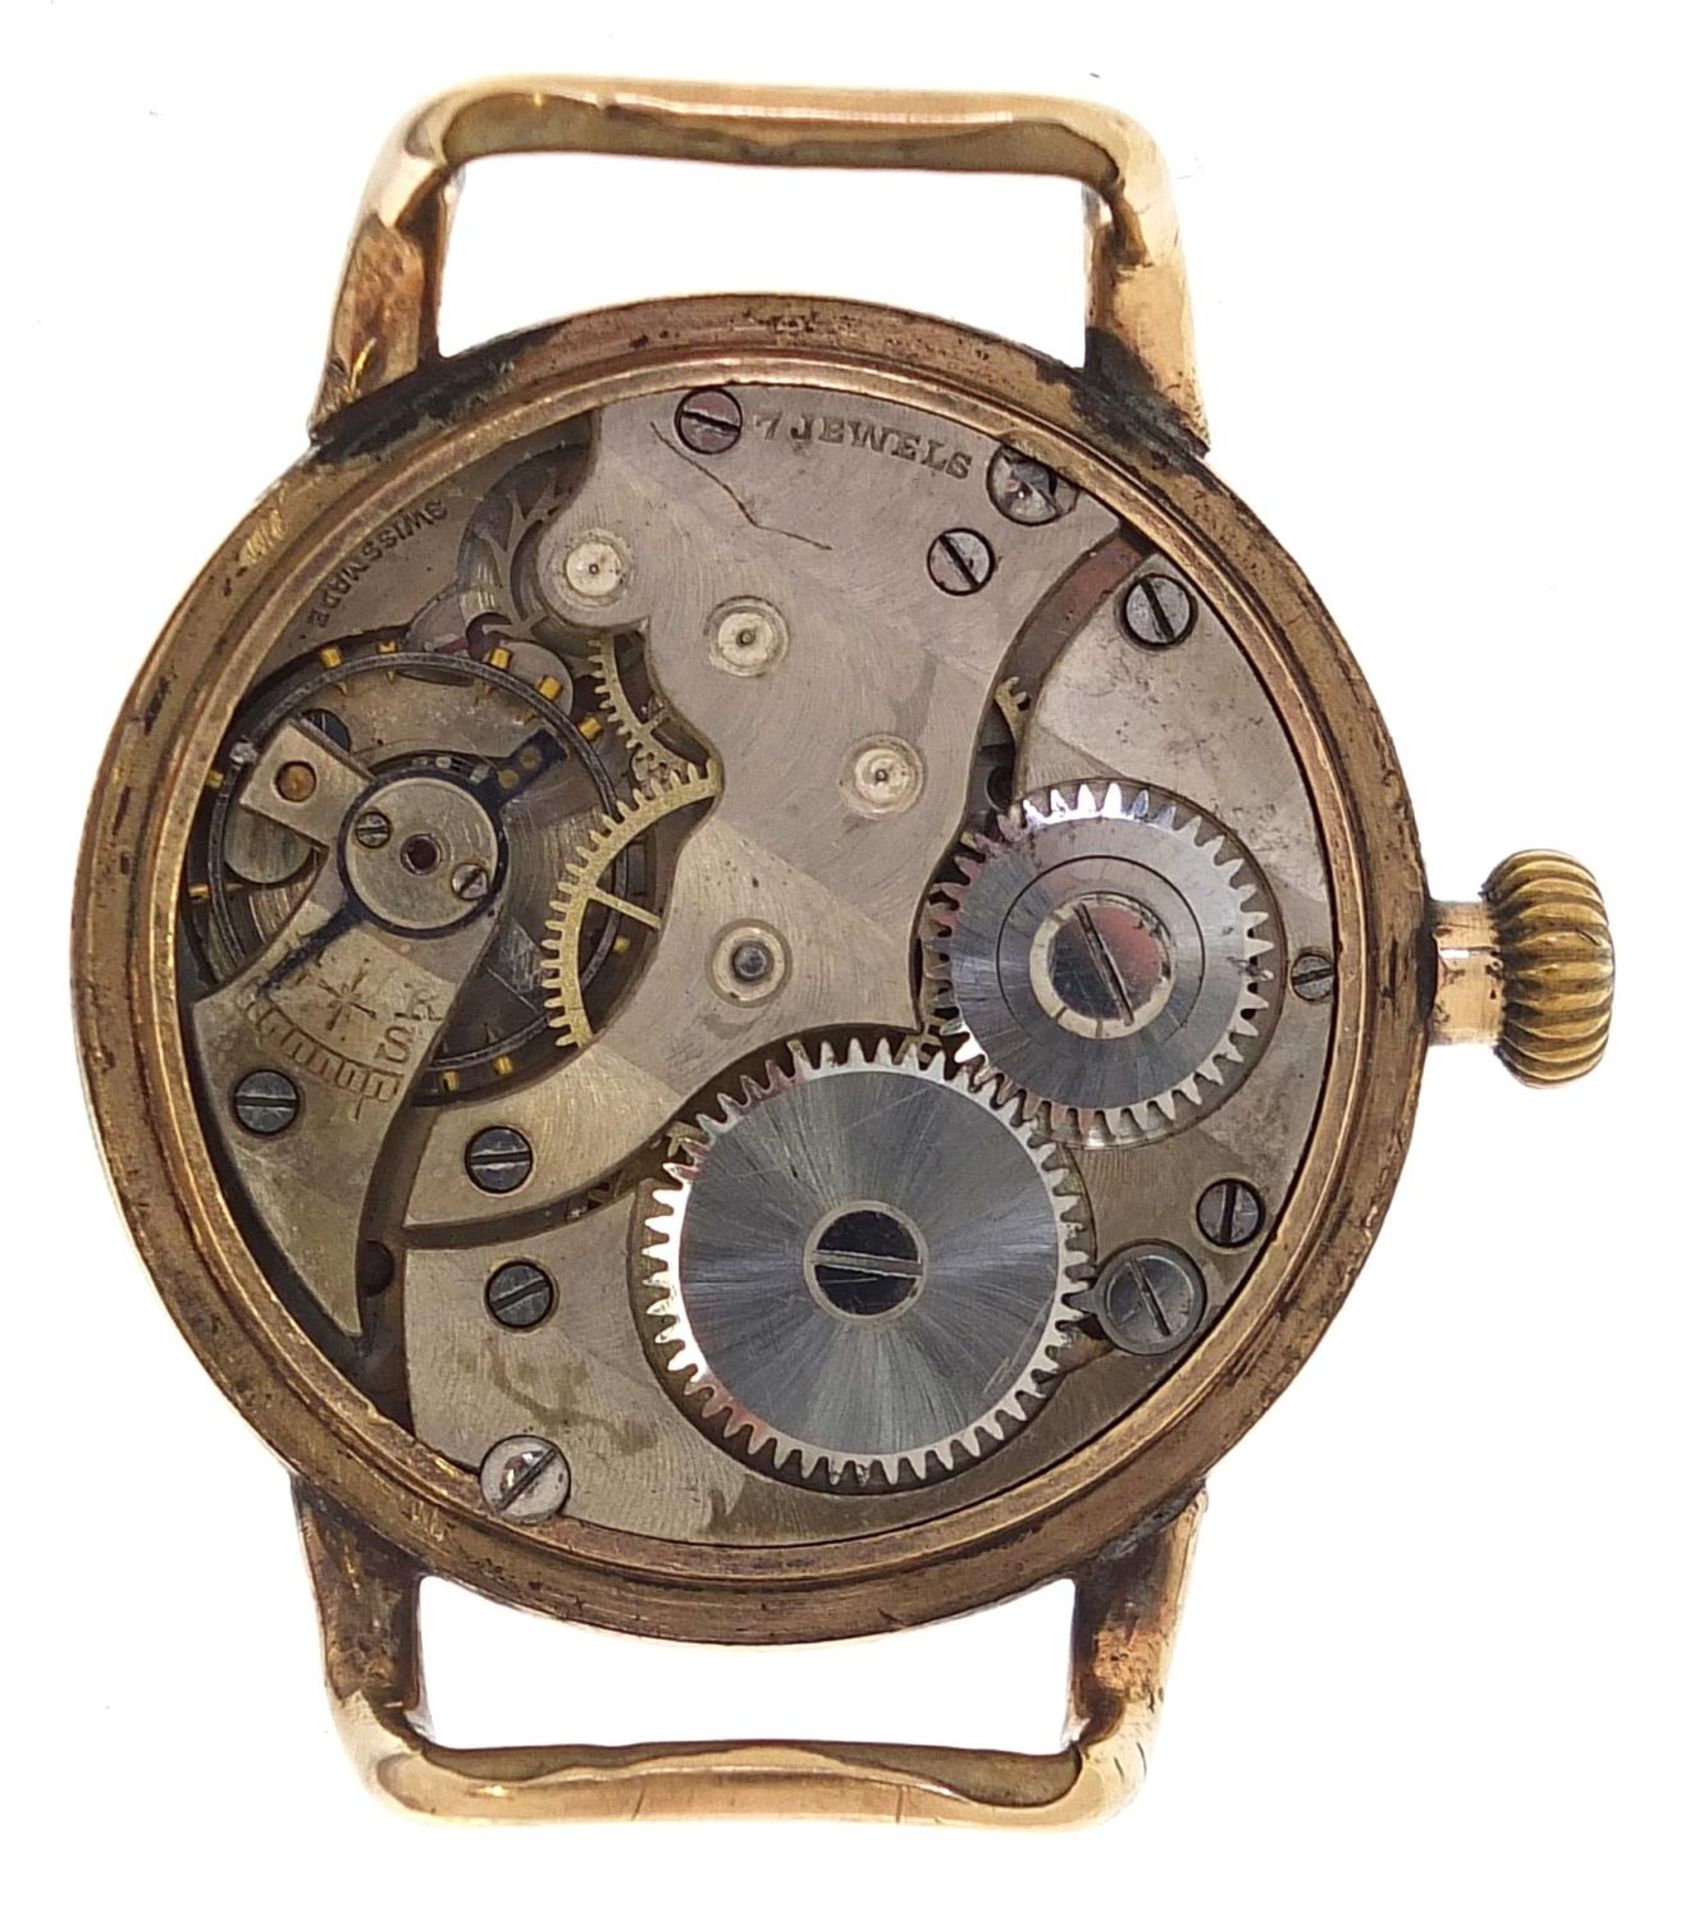 Thomas Russell & Son, gentlemen's gold plated wristwatch with enamelled dial, 32mm in diameter - Image 3 of 5